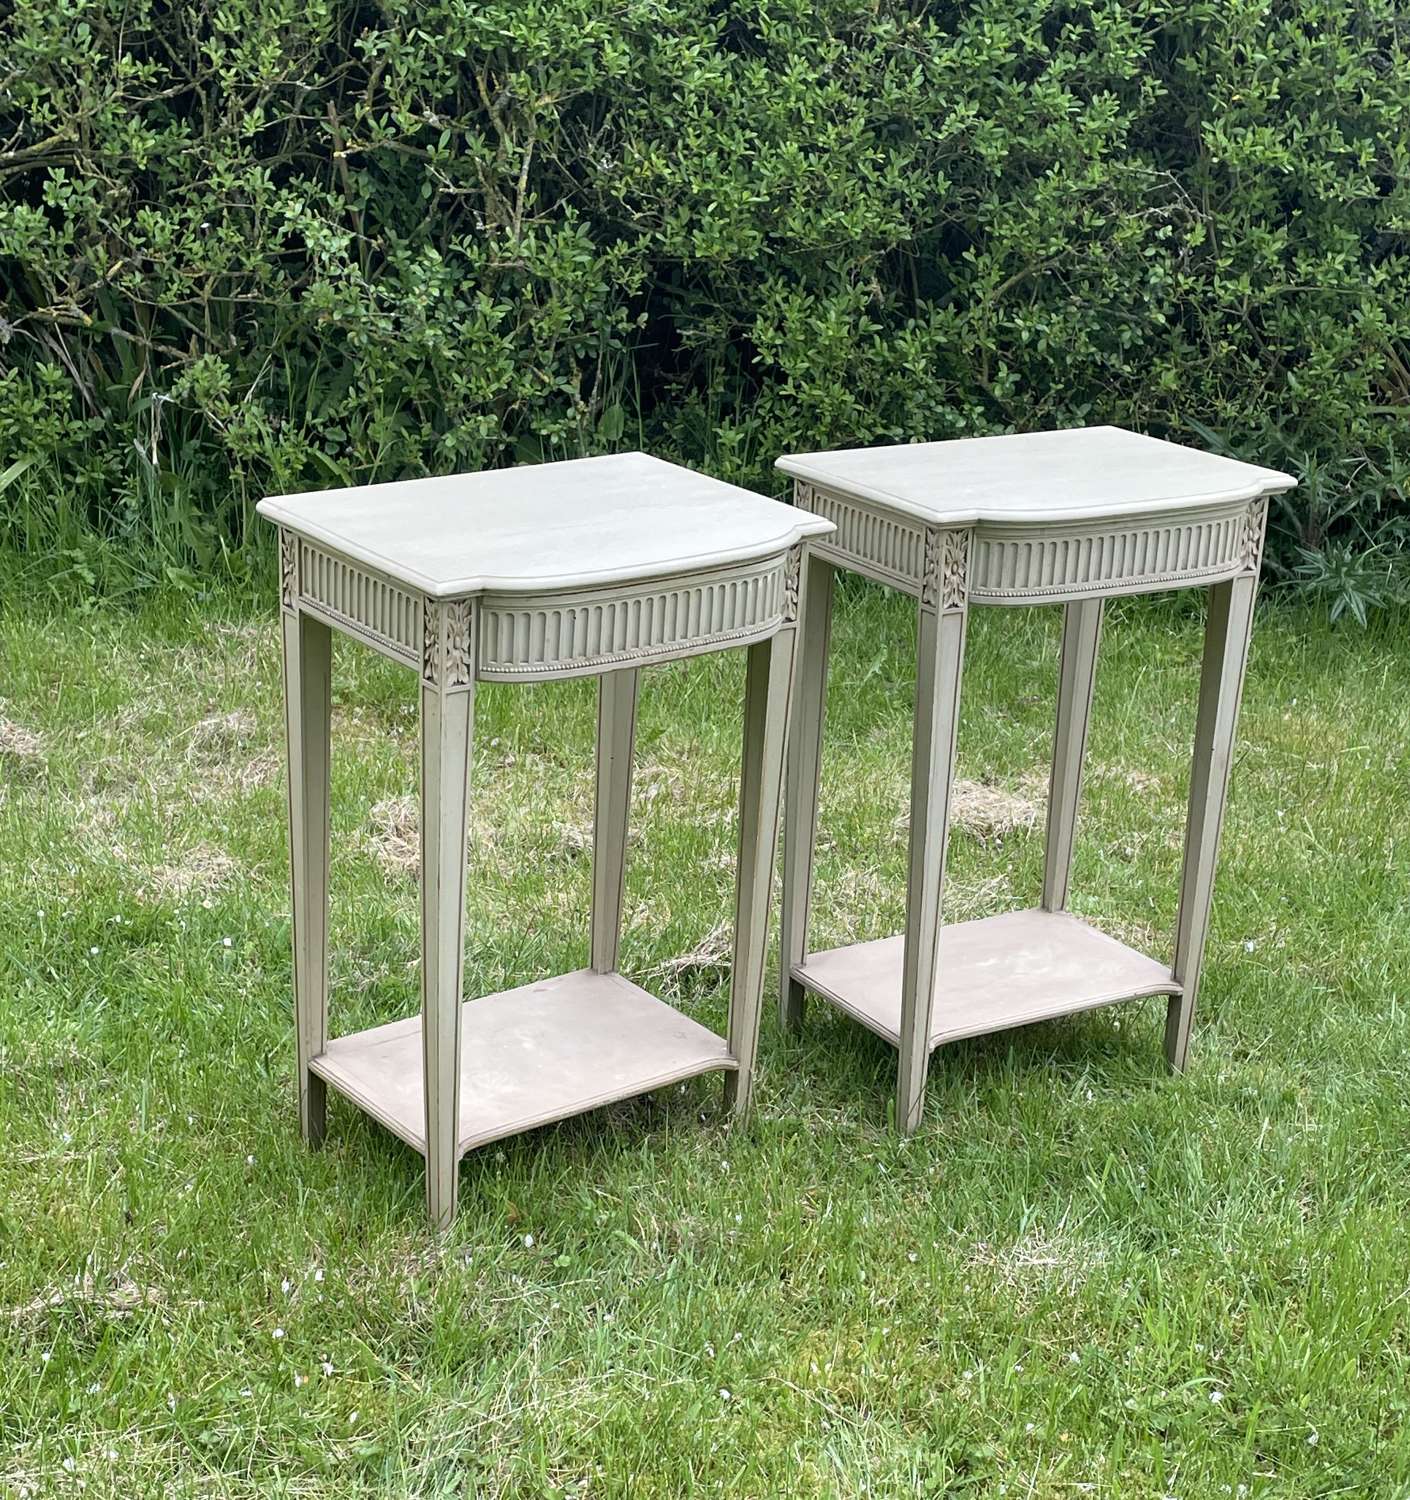 Pair of French Painted Bedside Tables